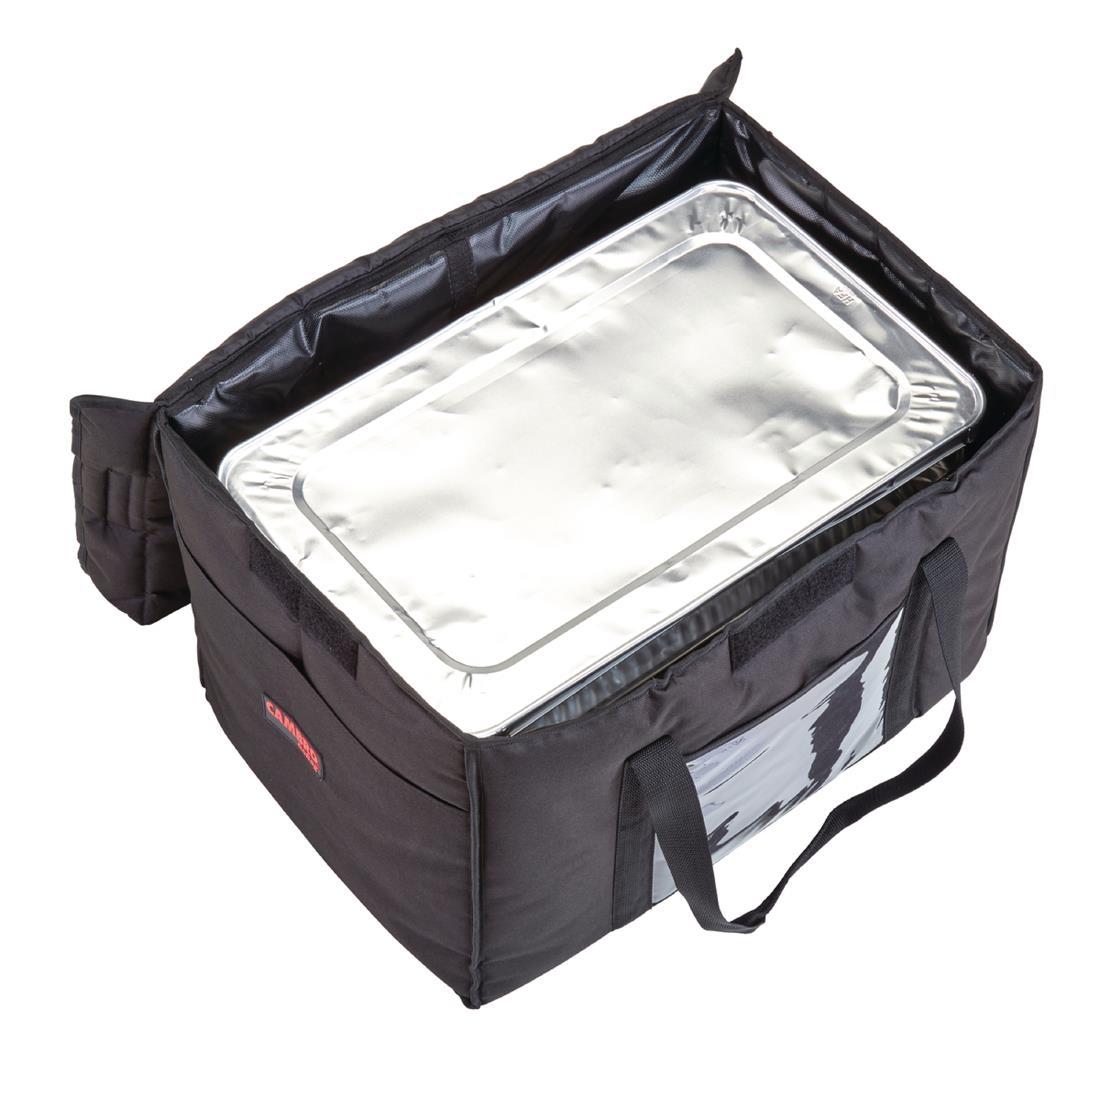 Cambro Top Loading GoBag Delivery Bag Large - FB274  - 4